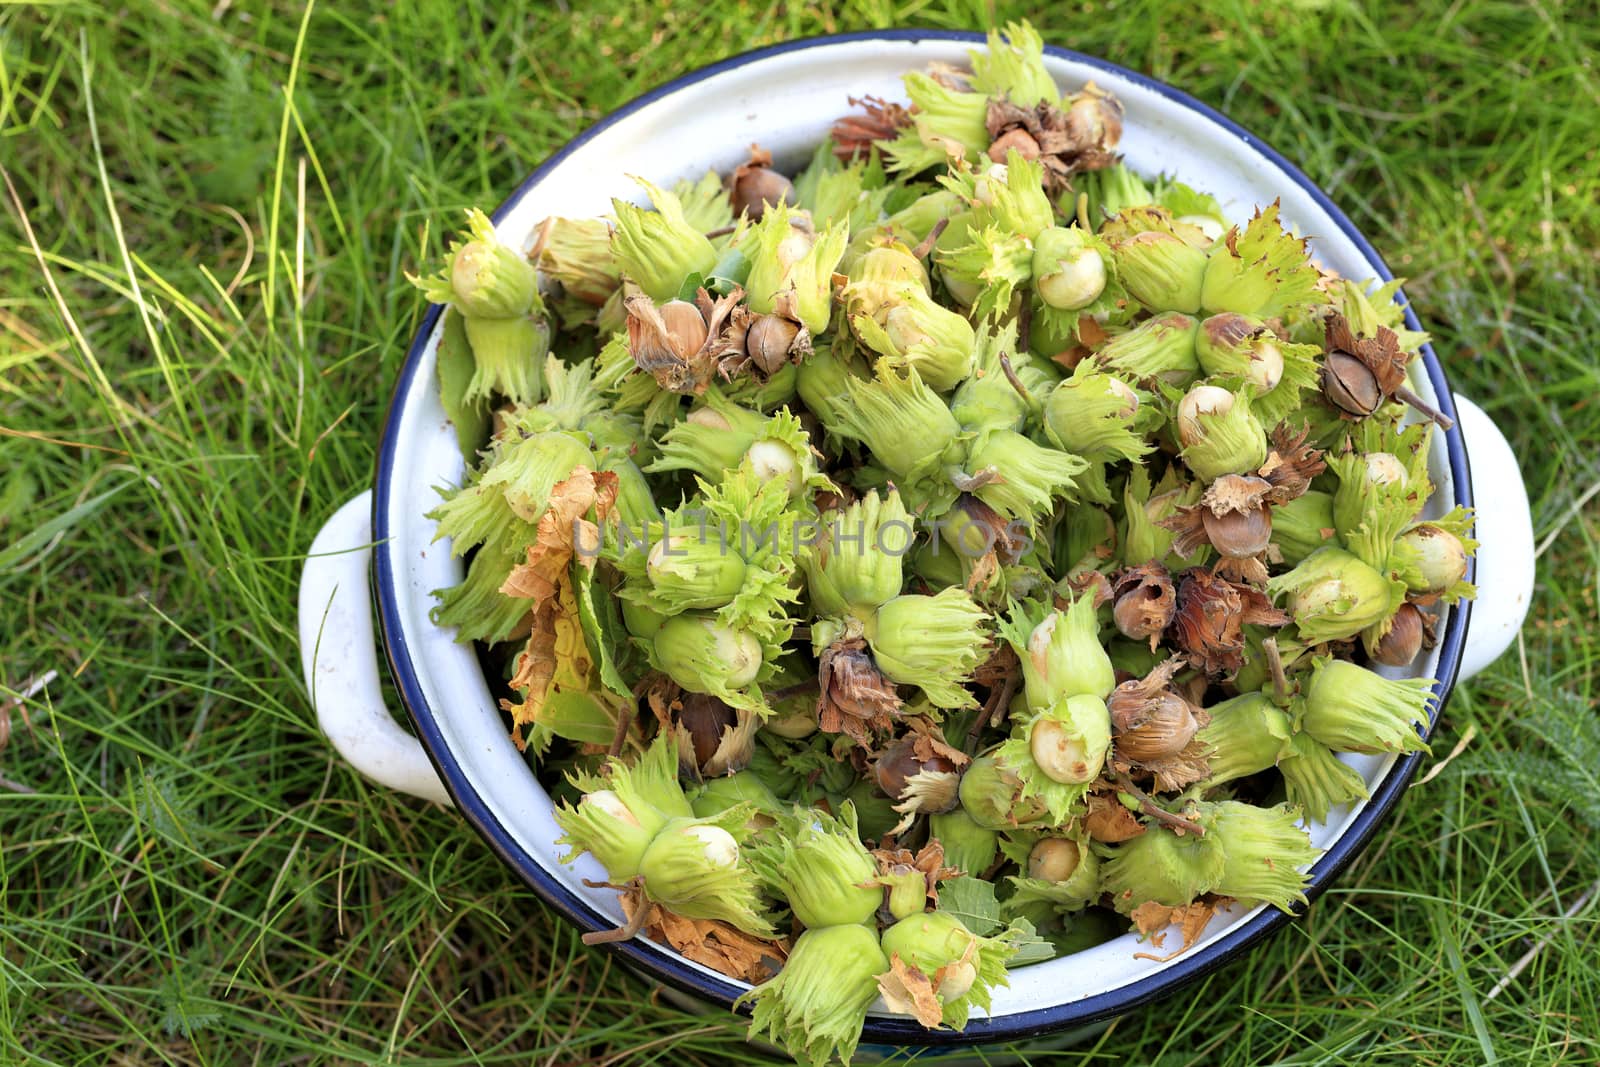 Harvest of a young hazelnut in a metal pan on a background of green grass.